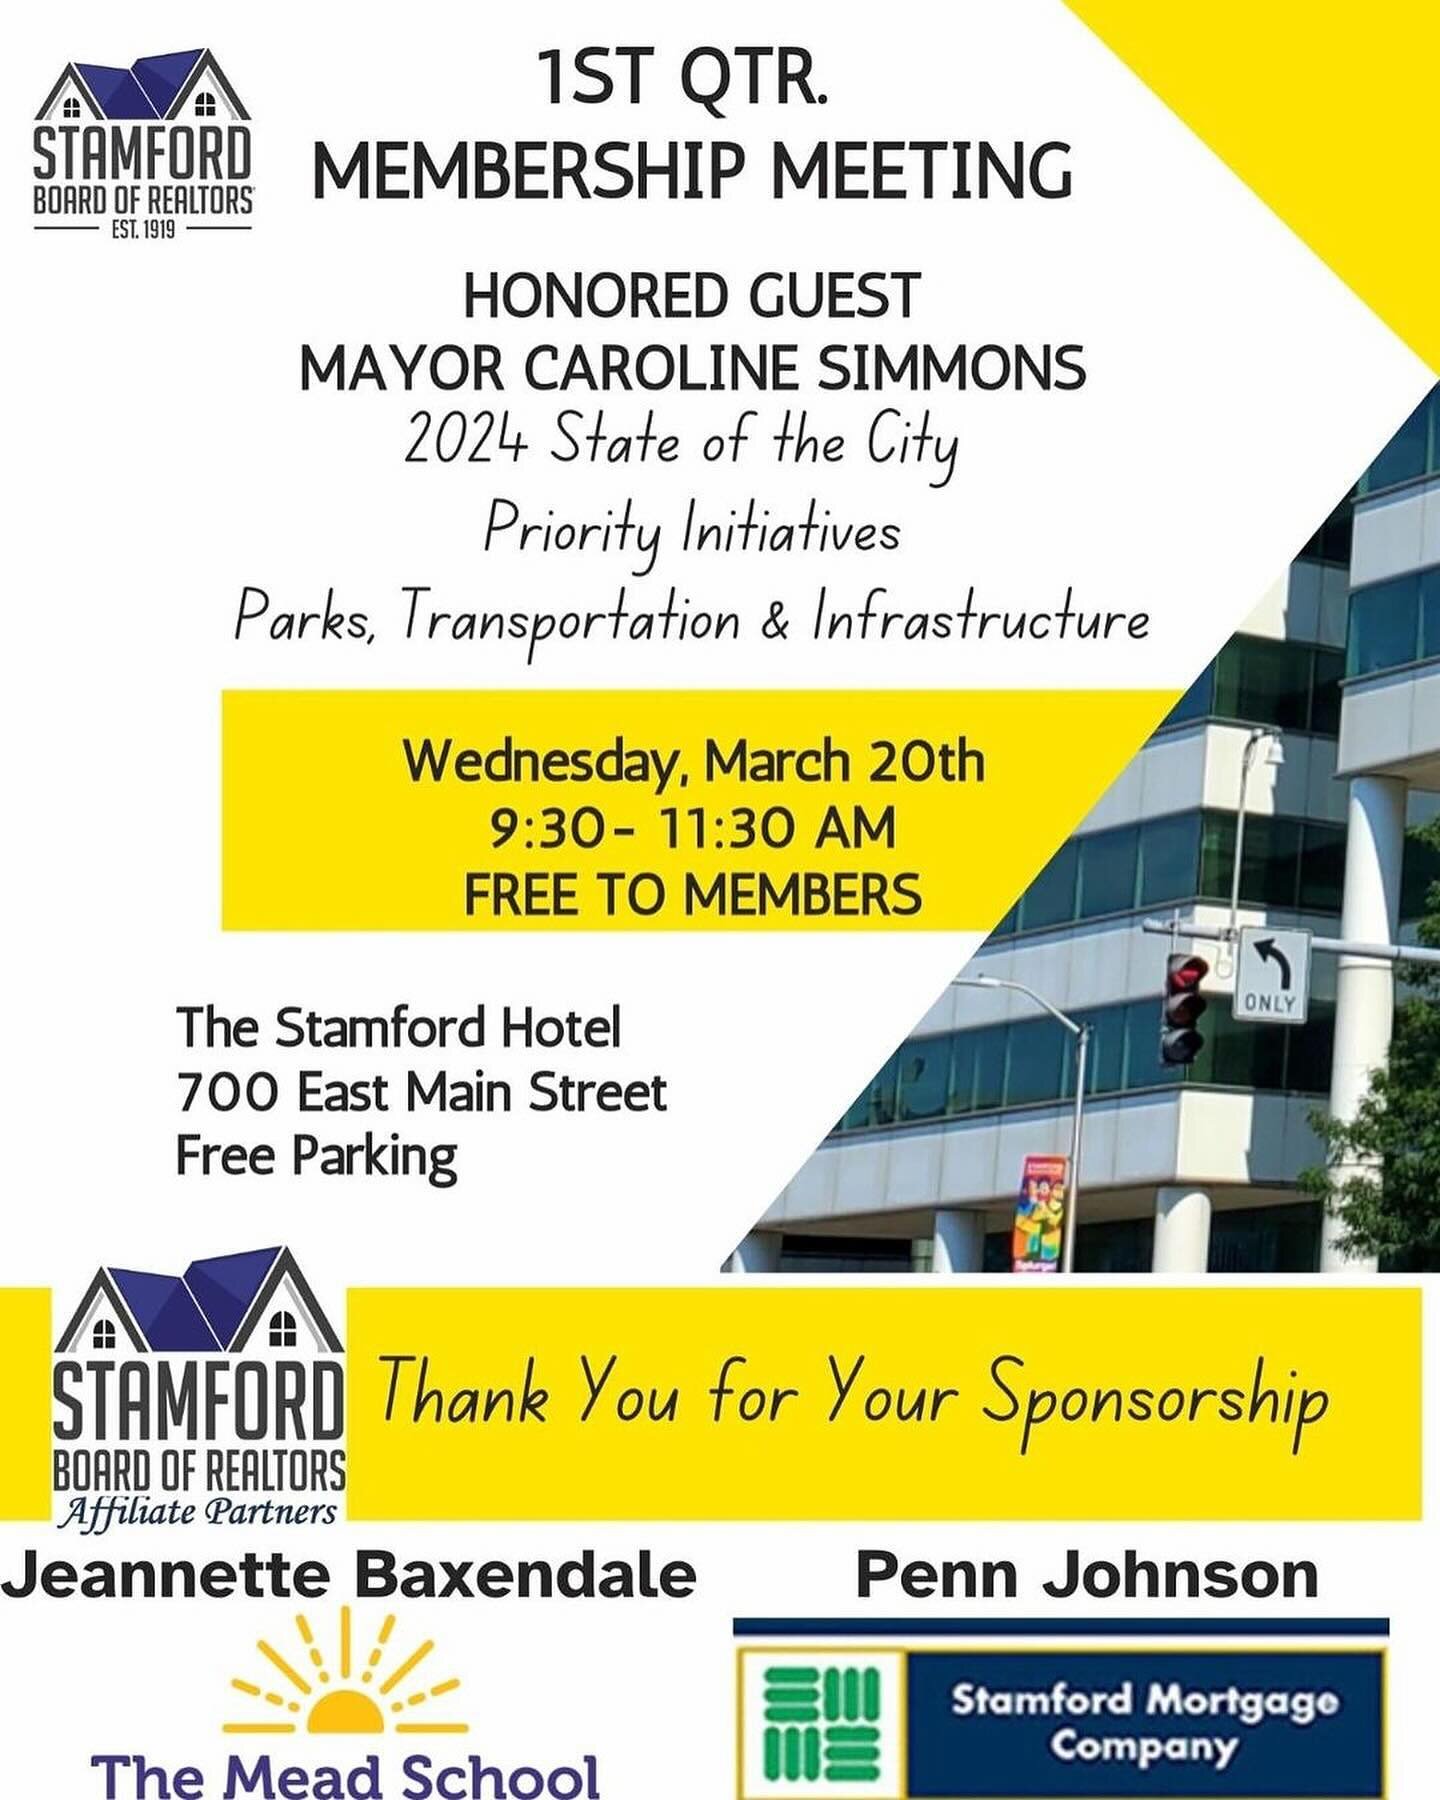 Happy to welcome @stamfordrealtors, their members and special invited guests, including @mayorcarolinesimmons today for their 1st Qtr Membership meeting at the Hotel. 

Be sure to book your meetings with us too. For more information: info@thestamford